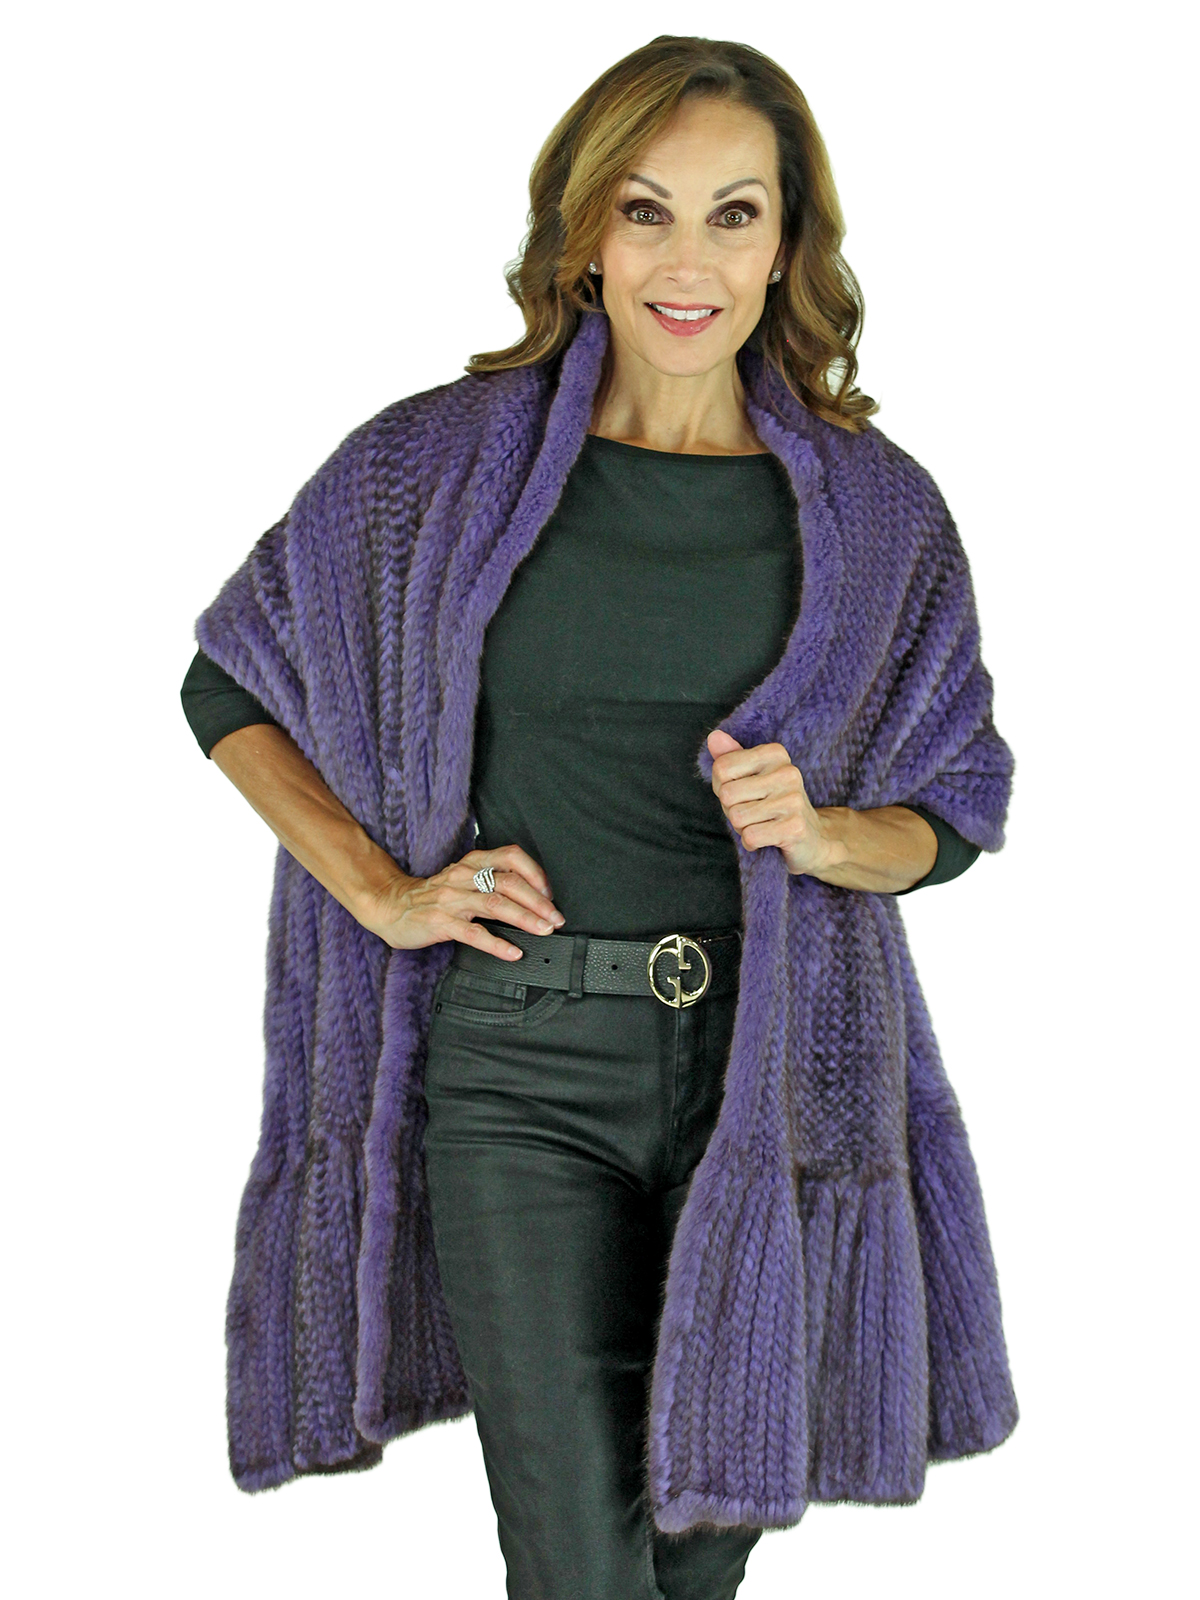 Woman's Purple and Black Knitted Mink Fur Stole